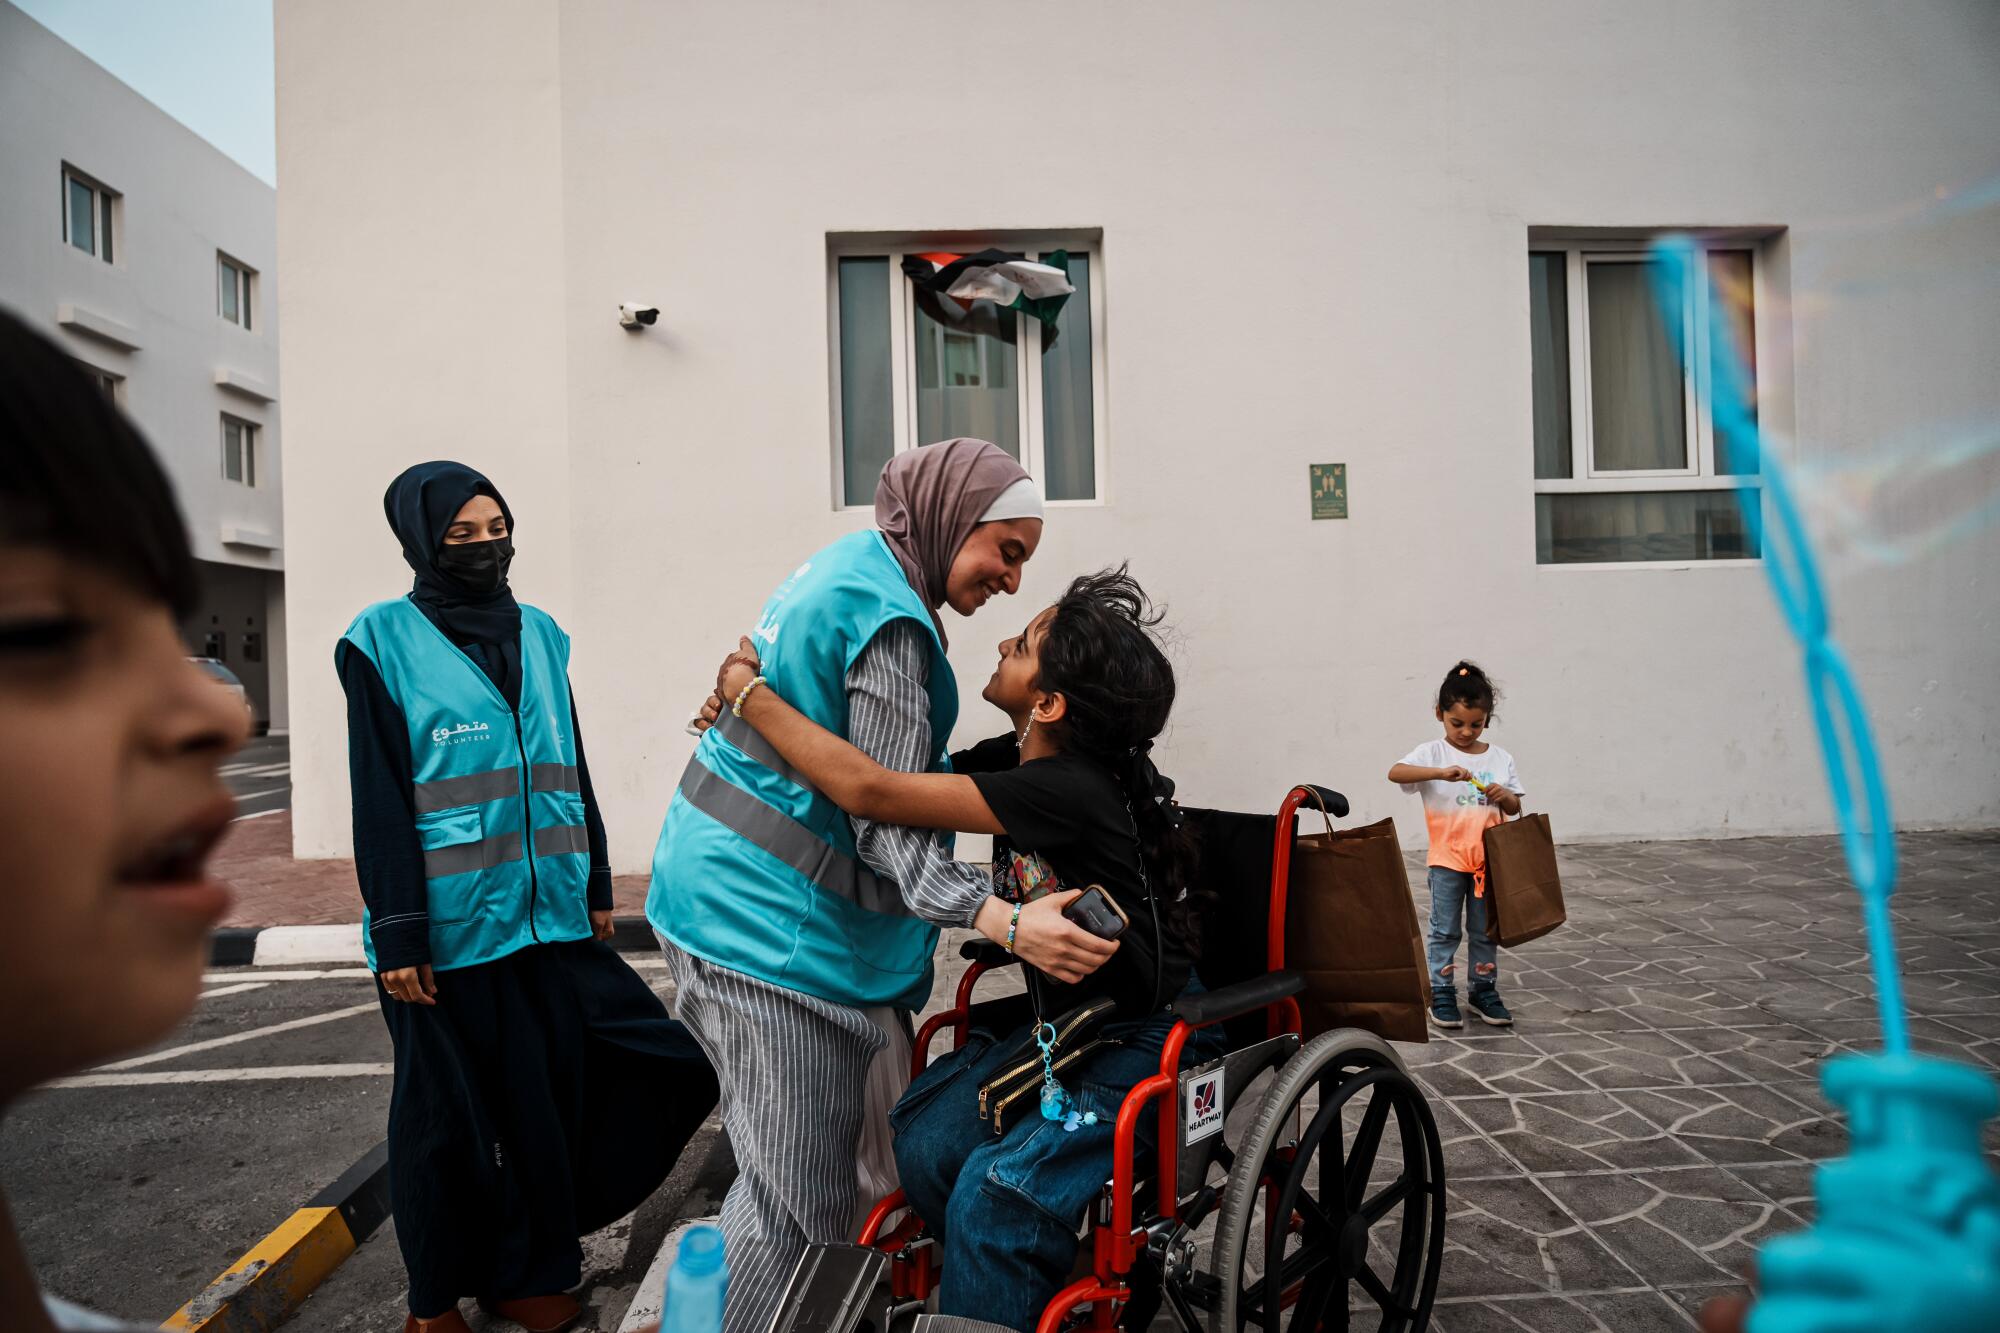 A child in a wheelchair hugs a young woman, in a hijab and turquoise vest, standing in a courtyard near other people